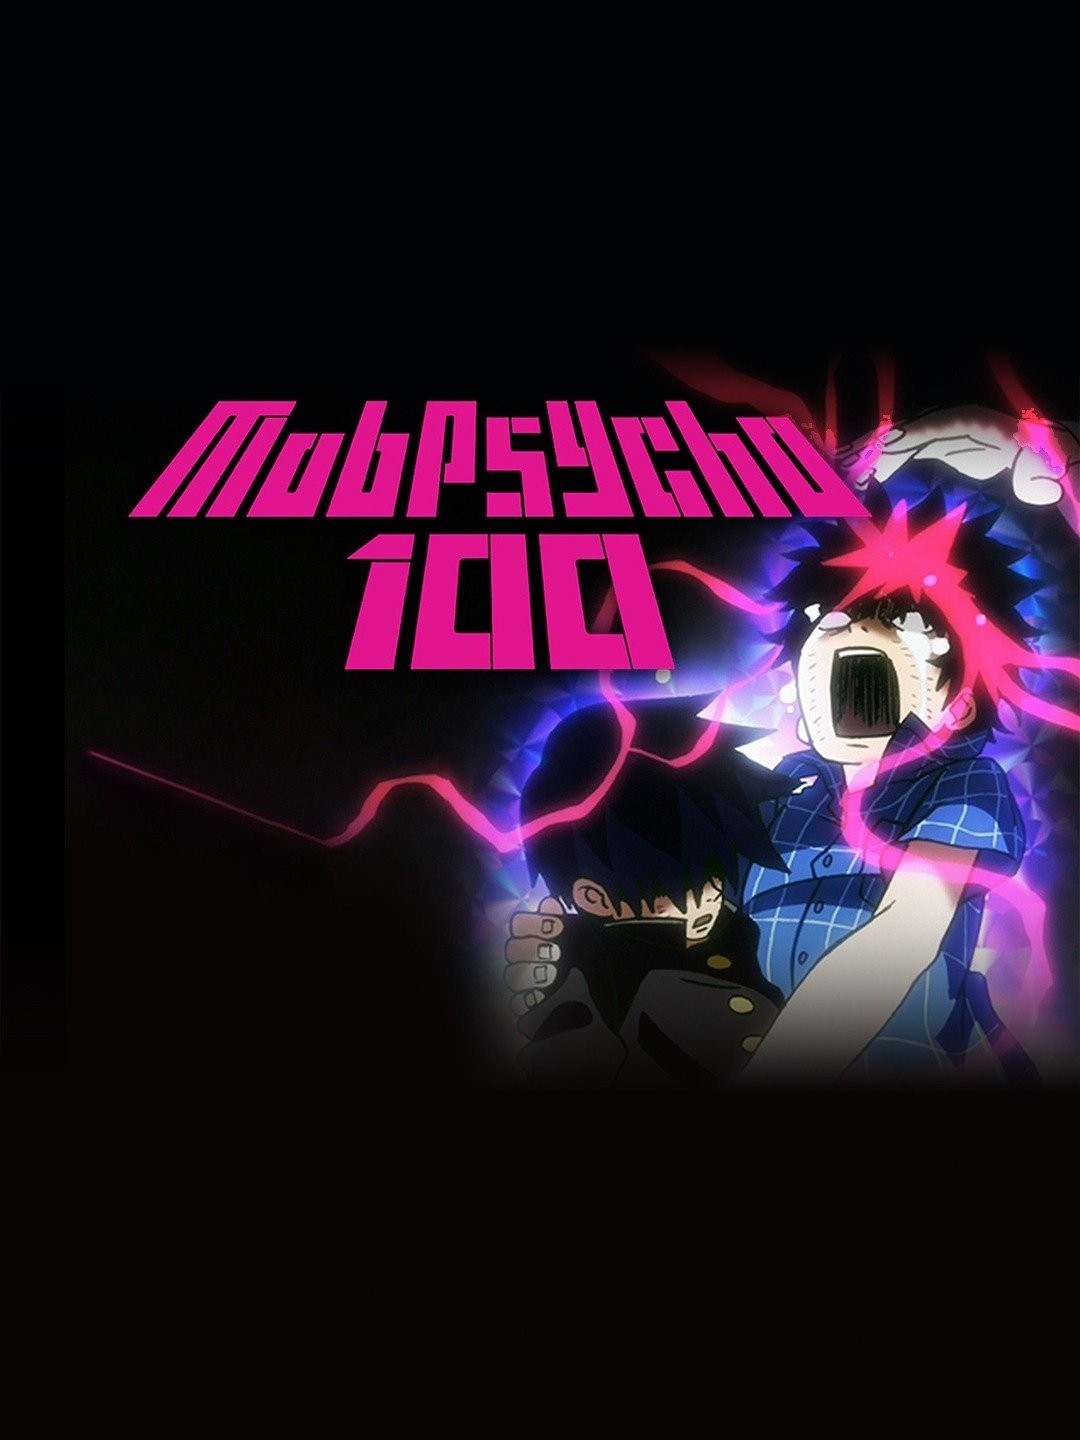 Check out Our Recap of 'Mob Psycho 100' Before Watching Season 3